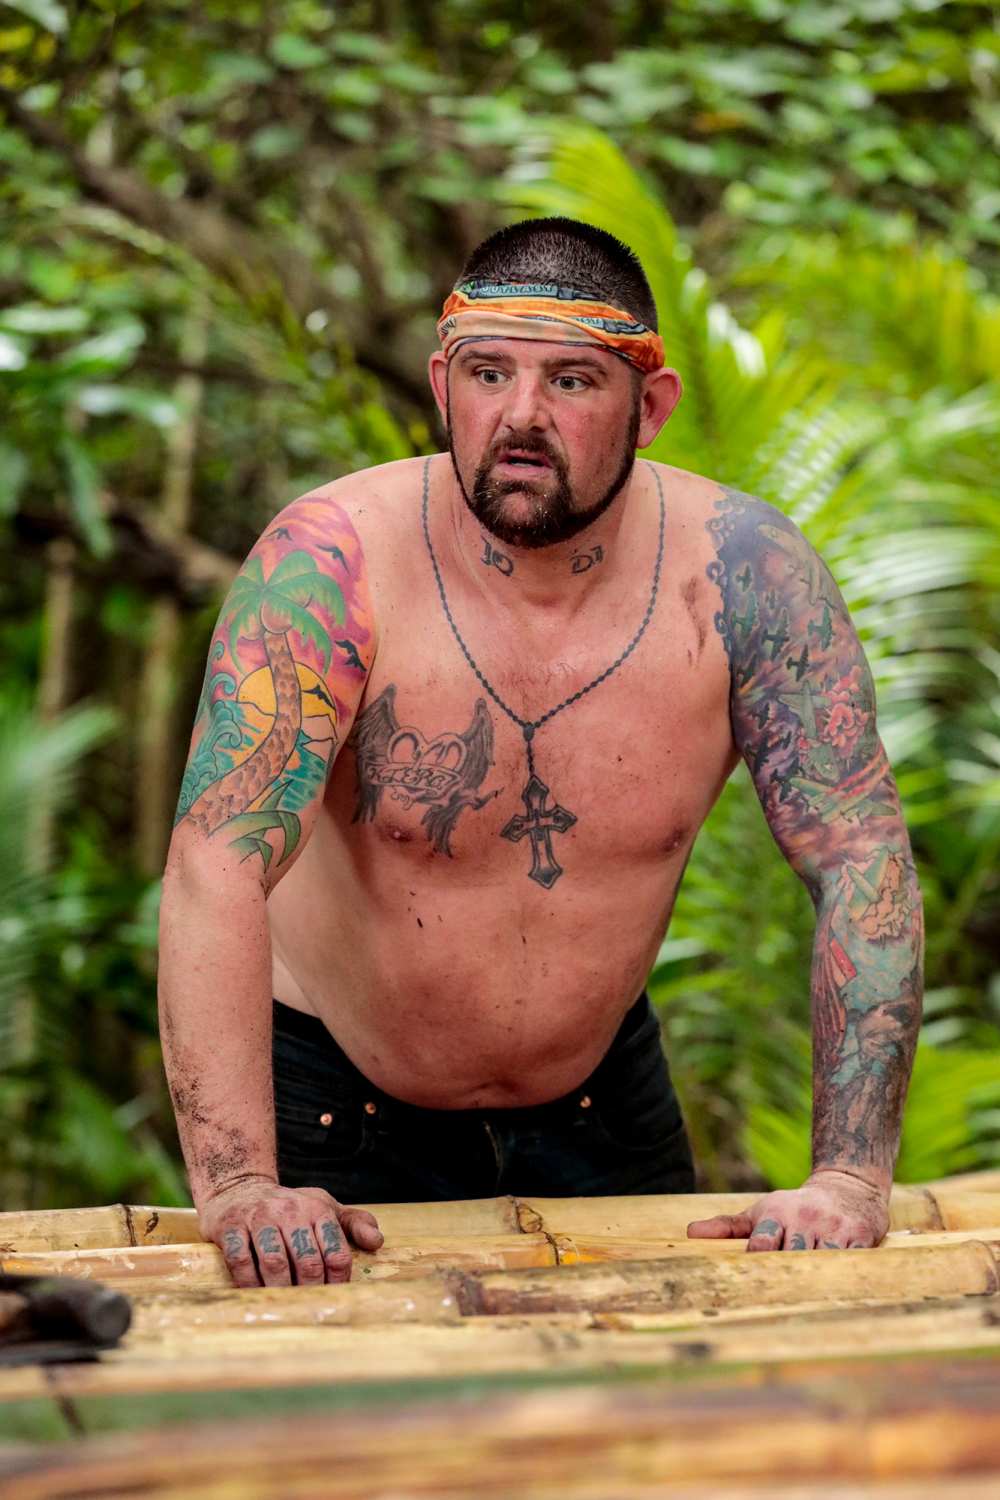 ‘Survivor’ Castoff Pat Cusack Admits He ‘Cried Like a Little Schoolgirl’ While Rewatching His Medical Evacuation